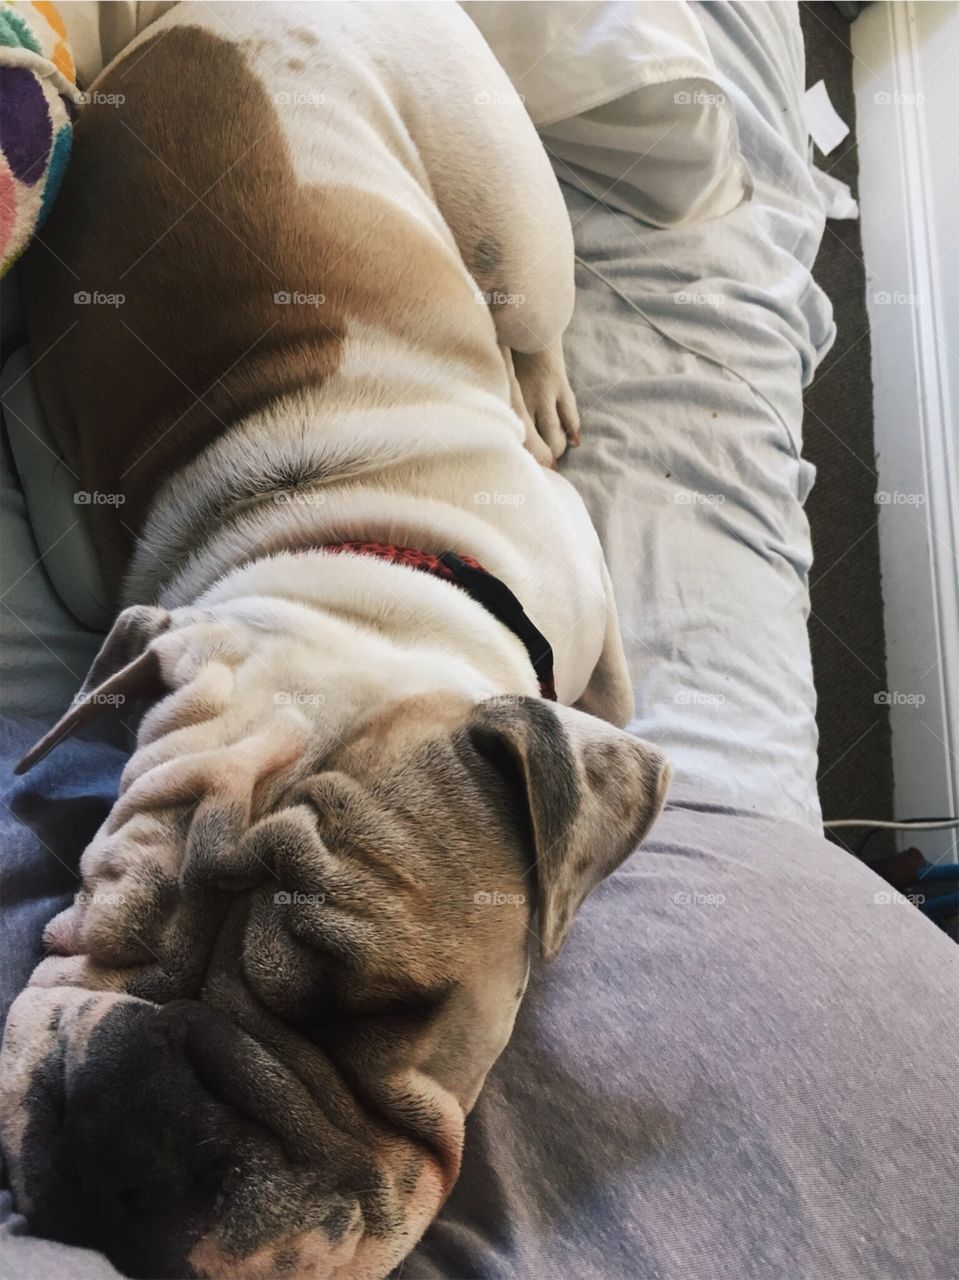 Sleeping bulldog ( English bulldog) shar pei (sharpei) dog. White and brown with red color. Very wrinkly only a year old. Cuddly and sleepy 